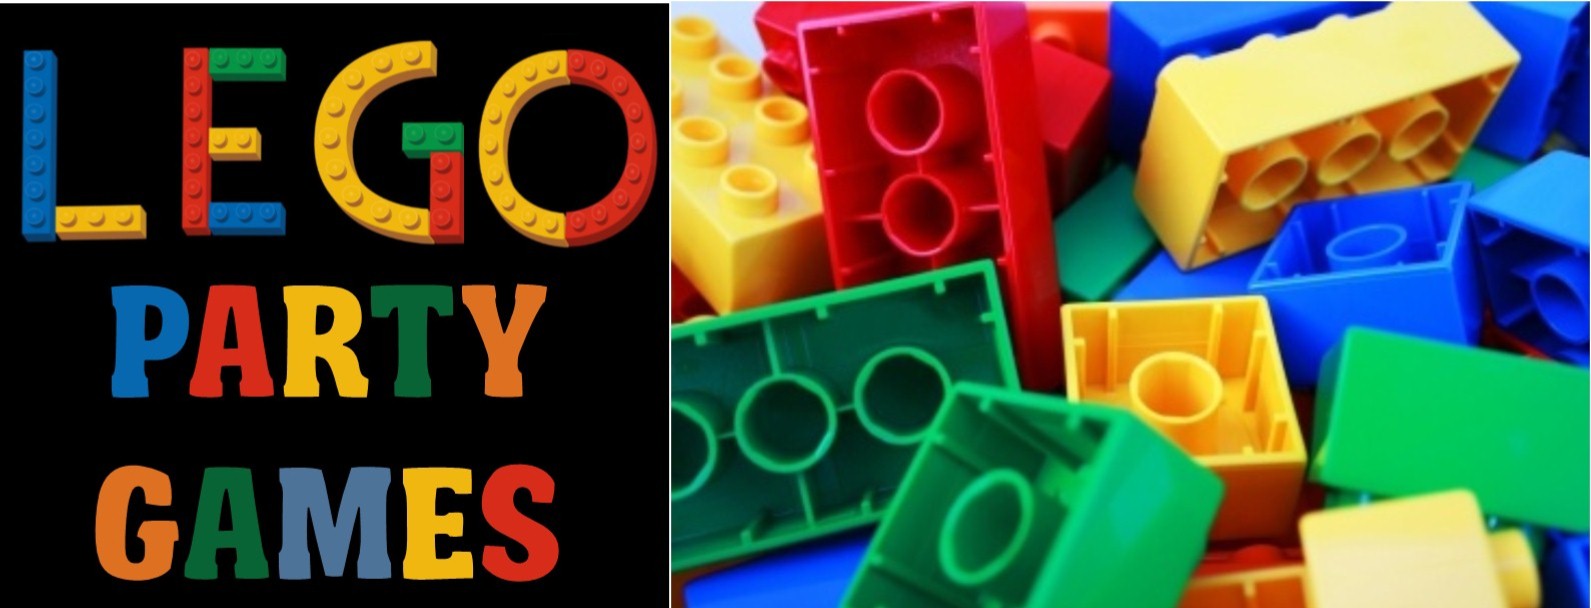 lego games for party